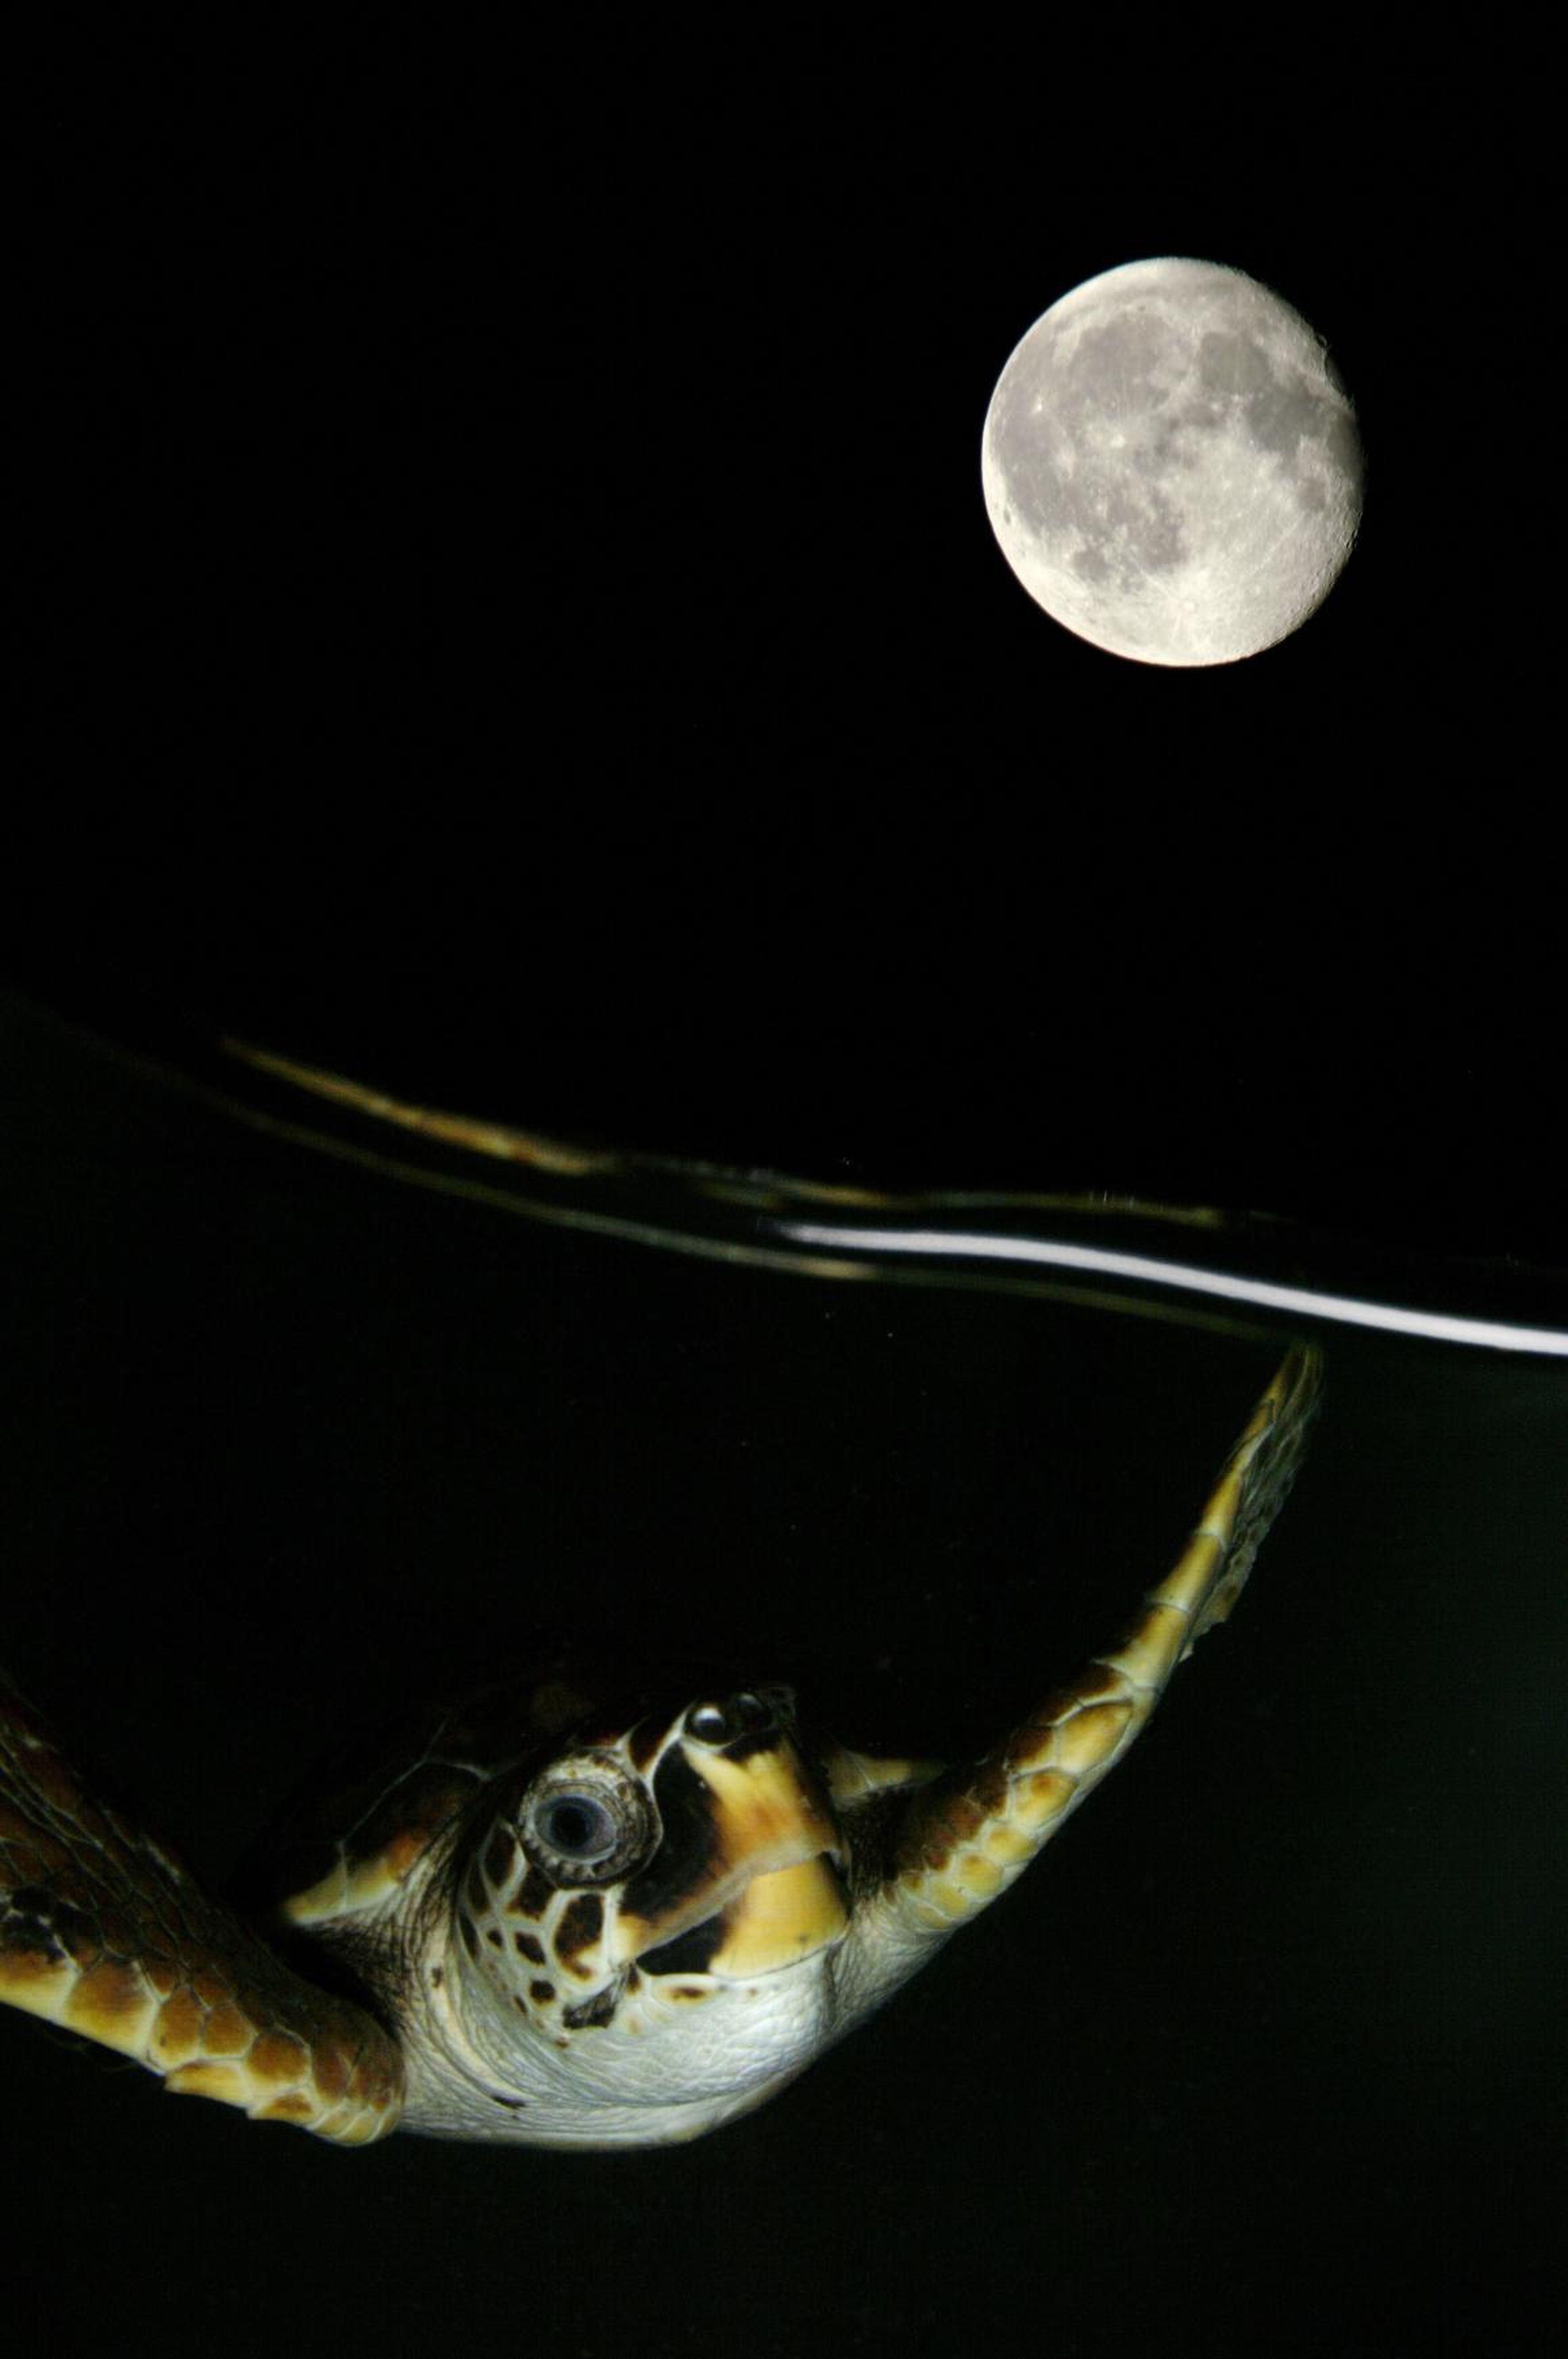 A turtle enjoys a nighttime swim in the Adriatic sea near Italy's coast in this image by Marco Caraceni.